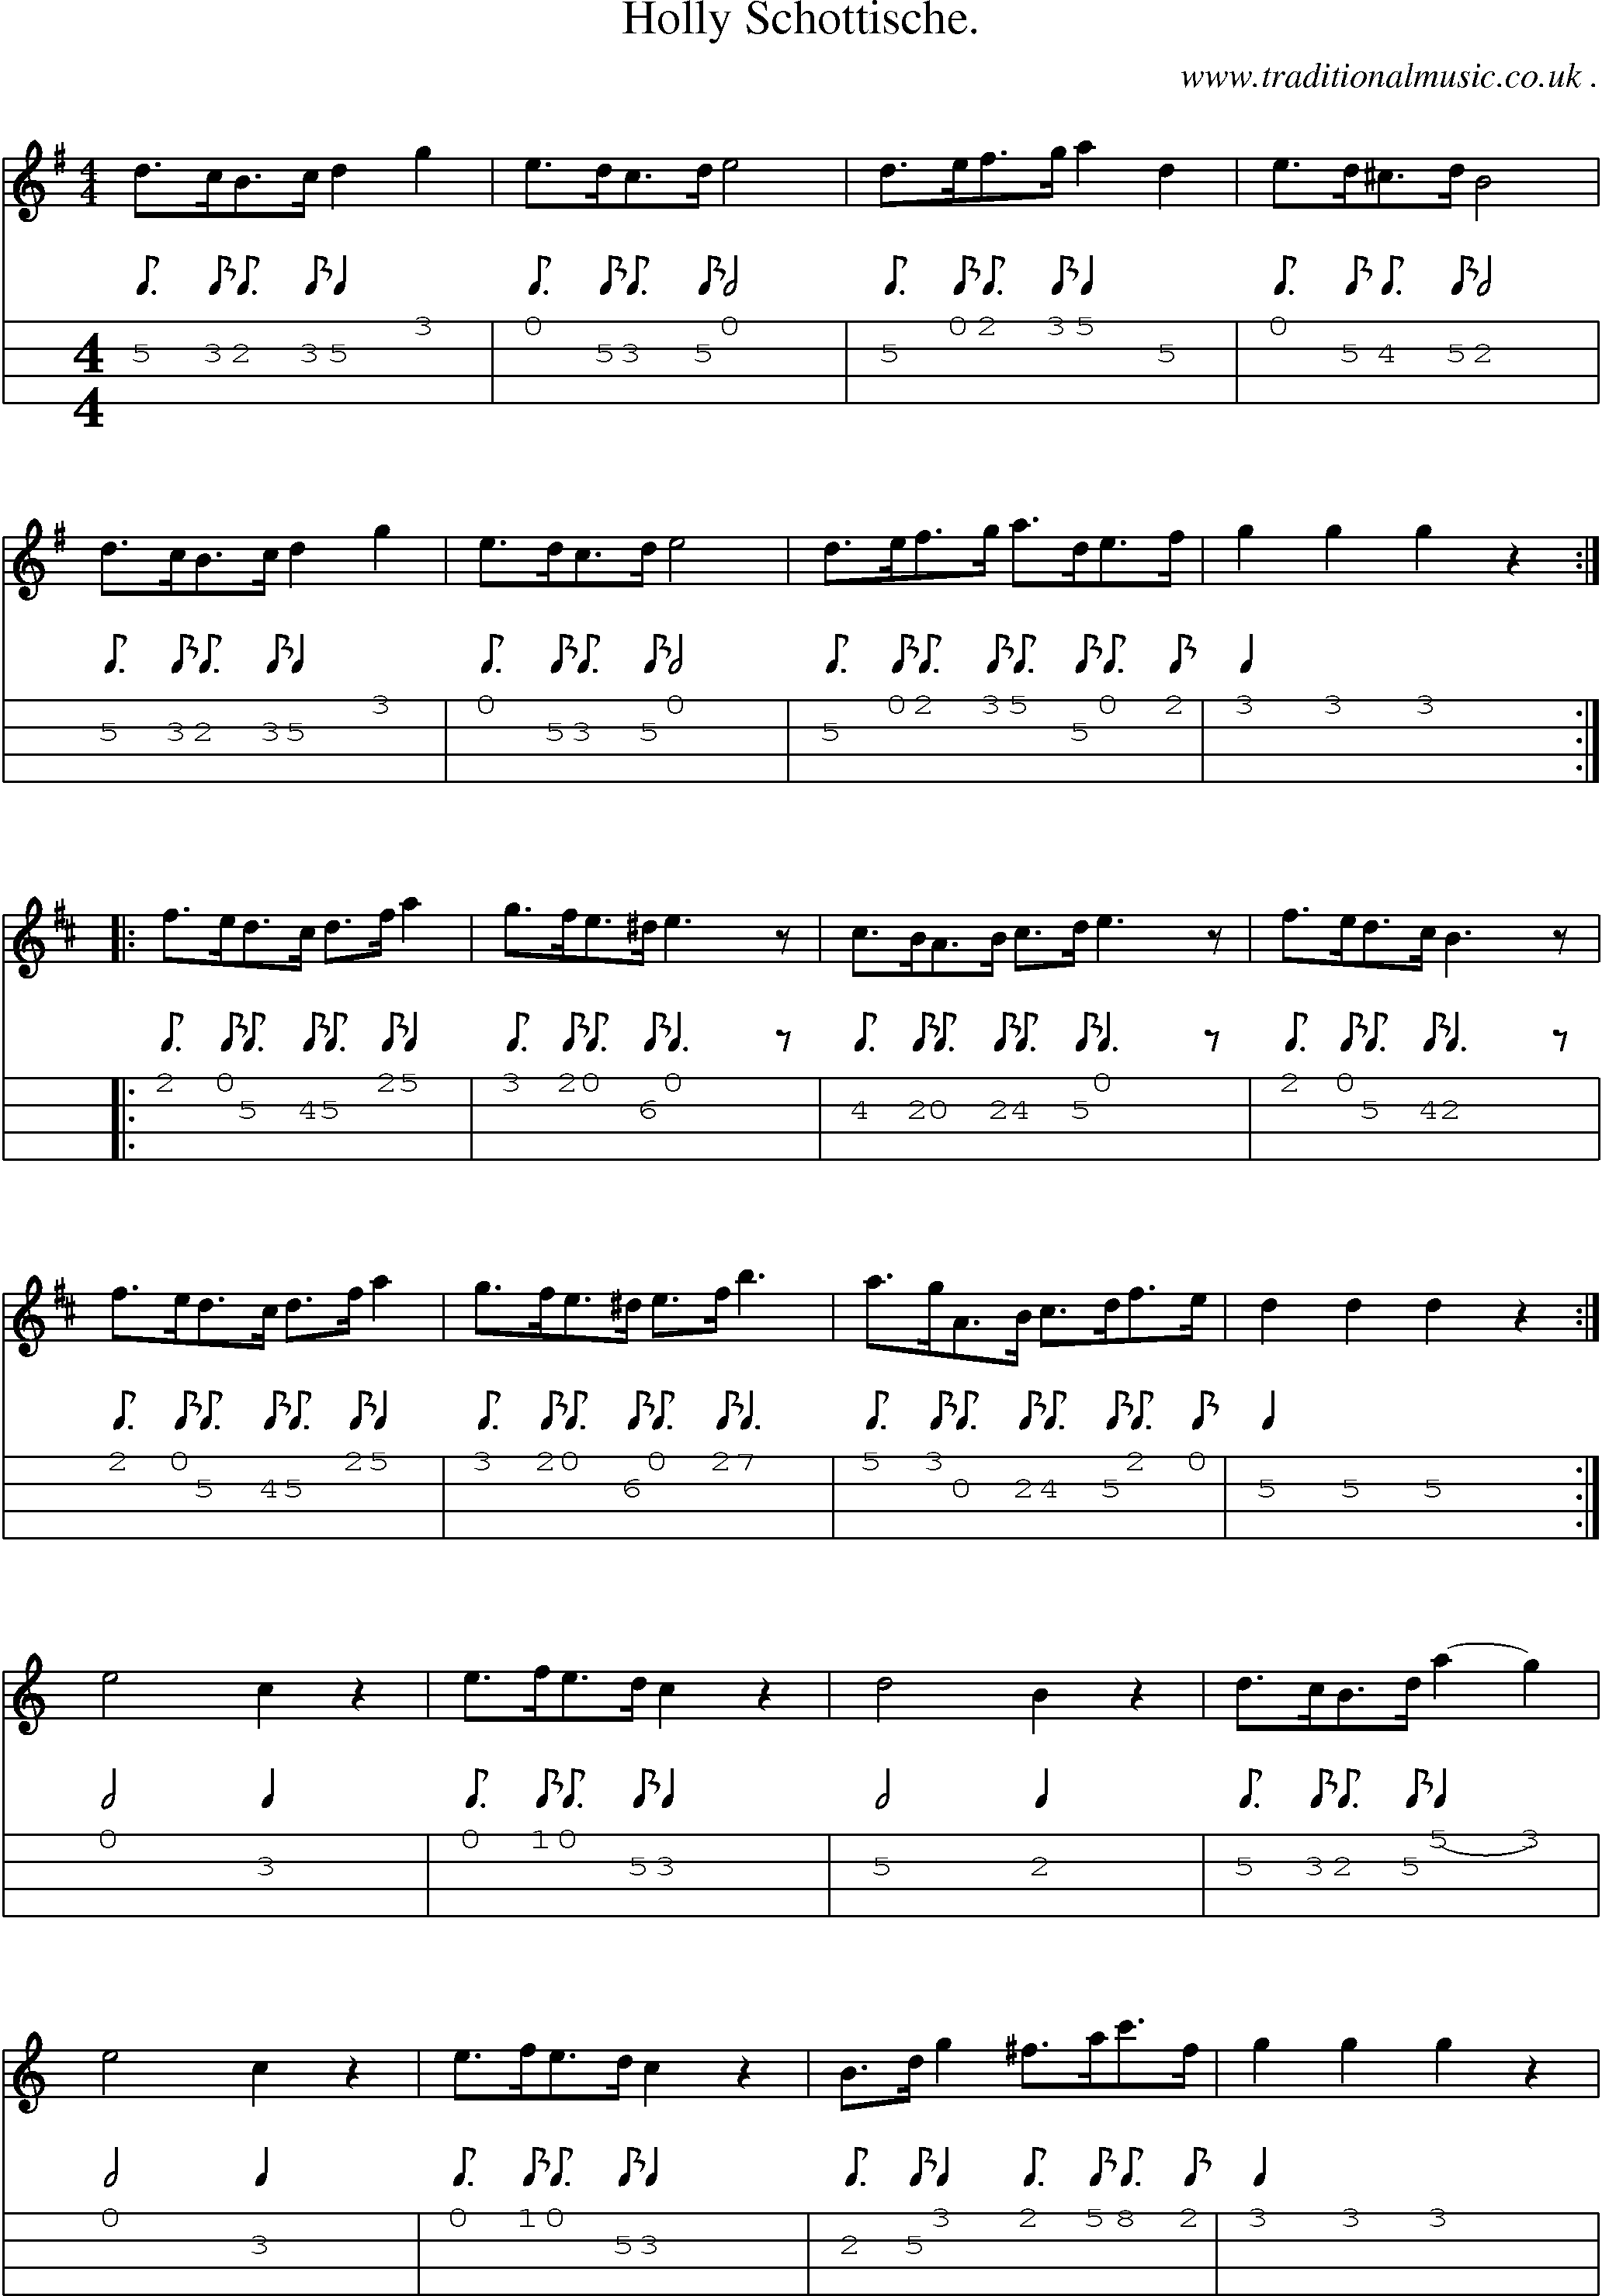 Sheet-Music and Mandolin Tabs for Holly Schottische